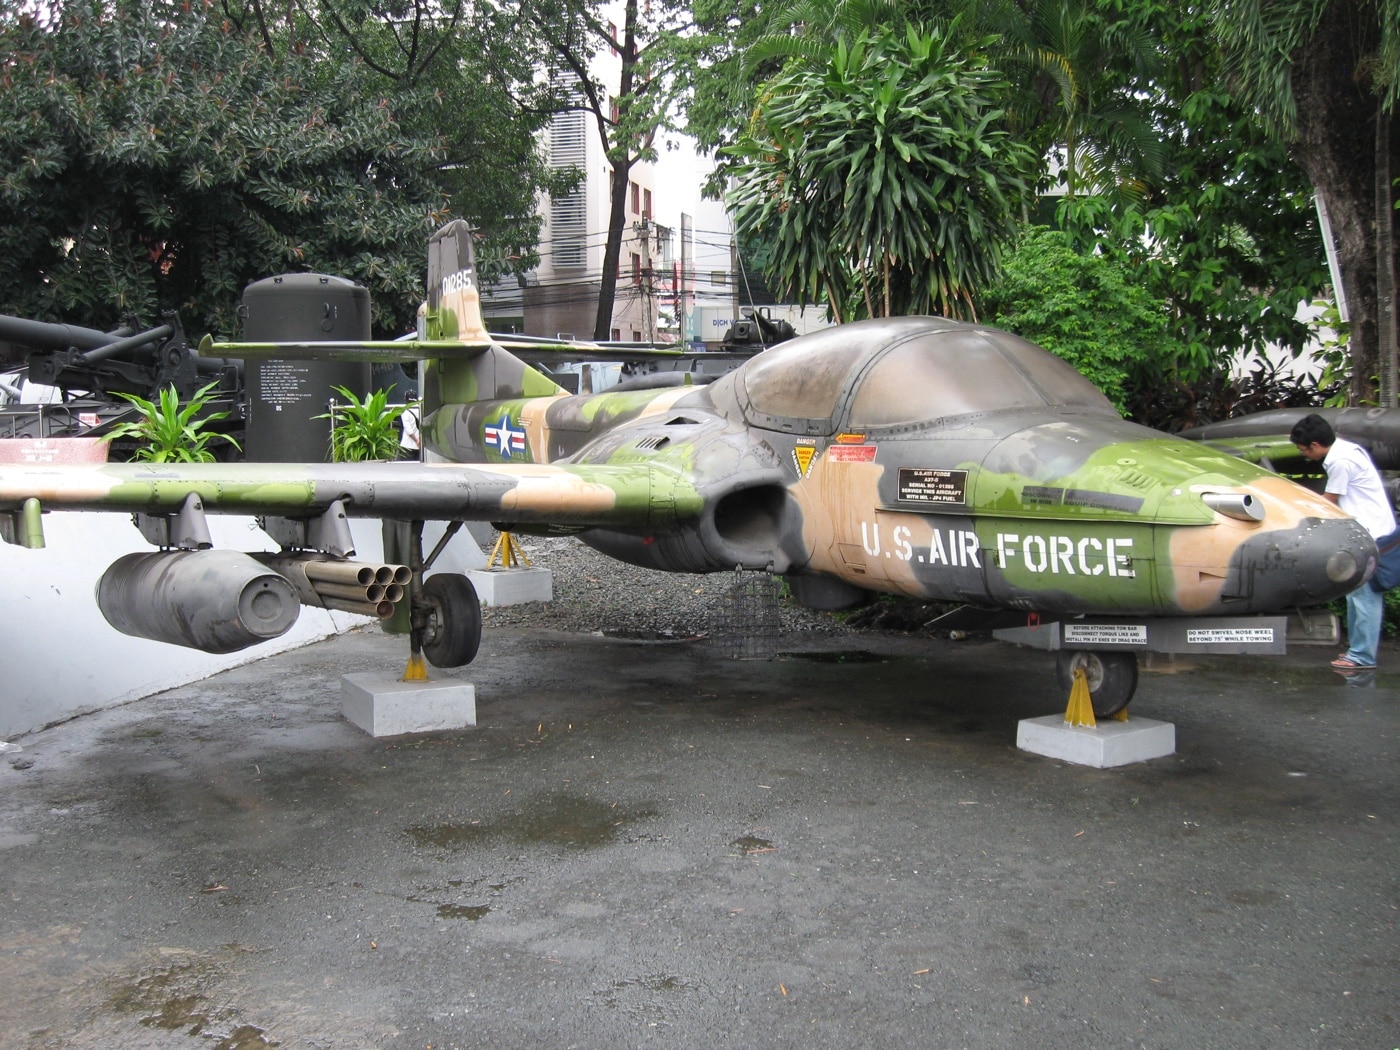 In this photo, we see a former US A-37 Dragonfly on display in a Vietnam War museum. The plane was transferred to the South Vietnam Air Force before being captured at Phan Rang Air Base by Vietnam People's Air Force. It served in the Vietnamese Air Force against the communist Government of China in the Sino-Vietnamese War in 1979. China launched an offensive in response to Vietnam's invasion and occupation of Cambodia in 1978, which ended the rule of the Chinese-backed Khmer Rouge.